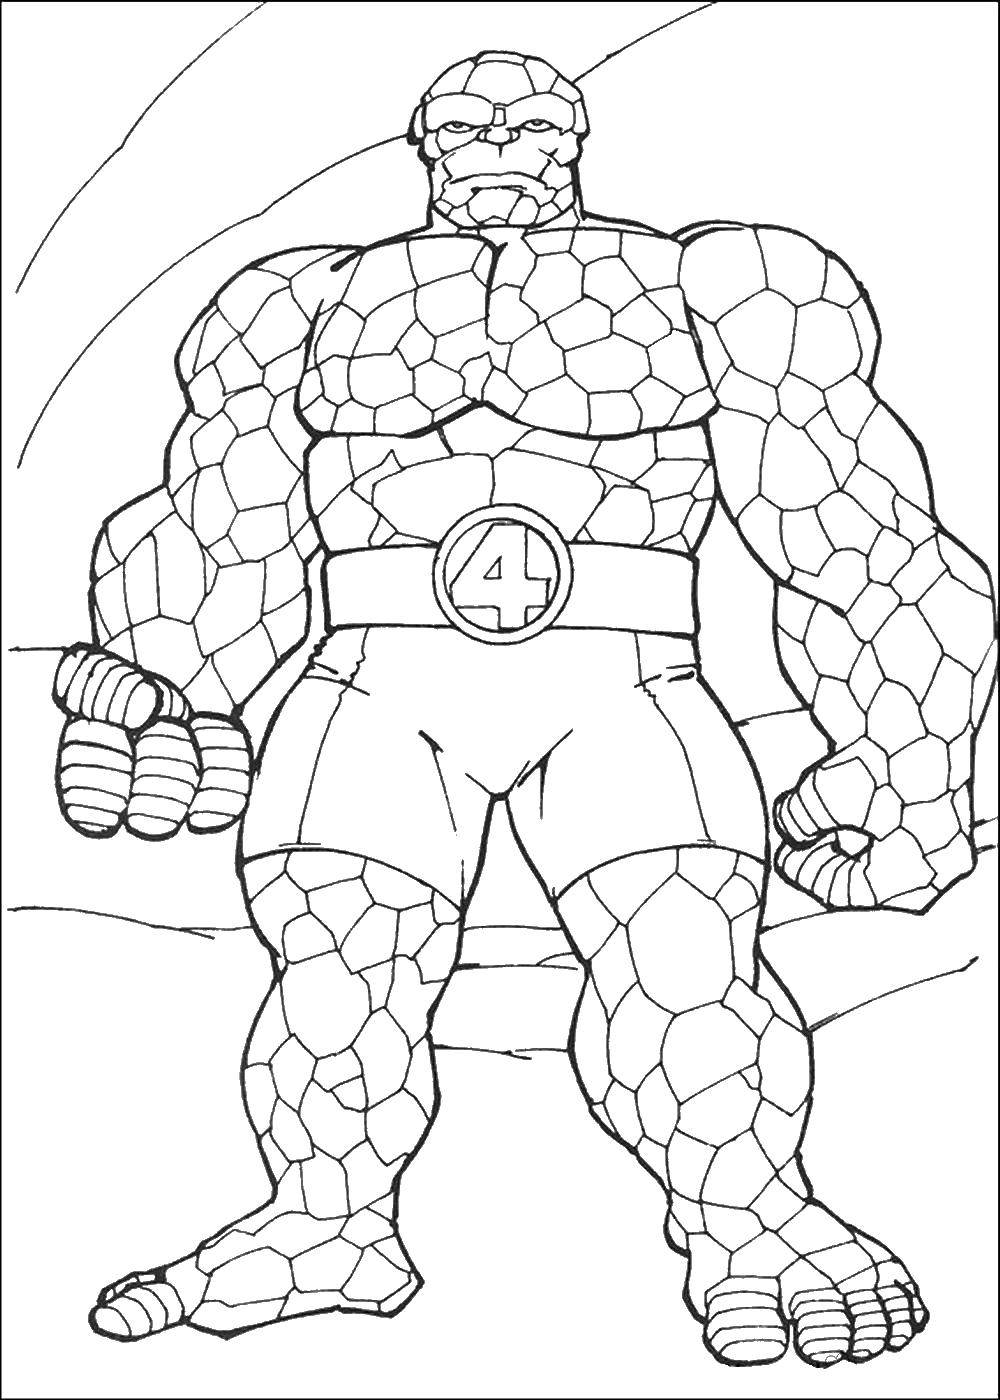 Coloring Fantastic four. Category superheroes. Tags:  superheroes, cartoons, fantastic four.